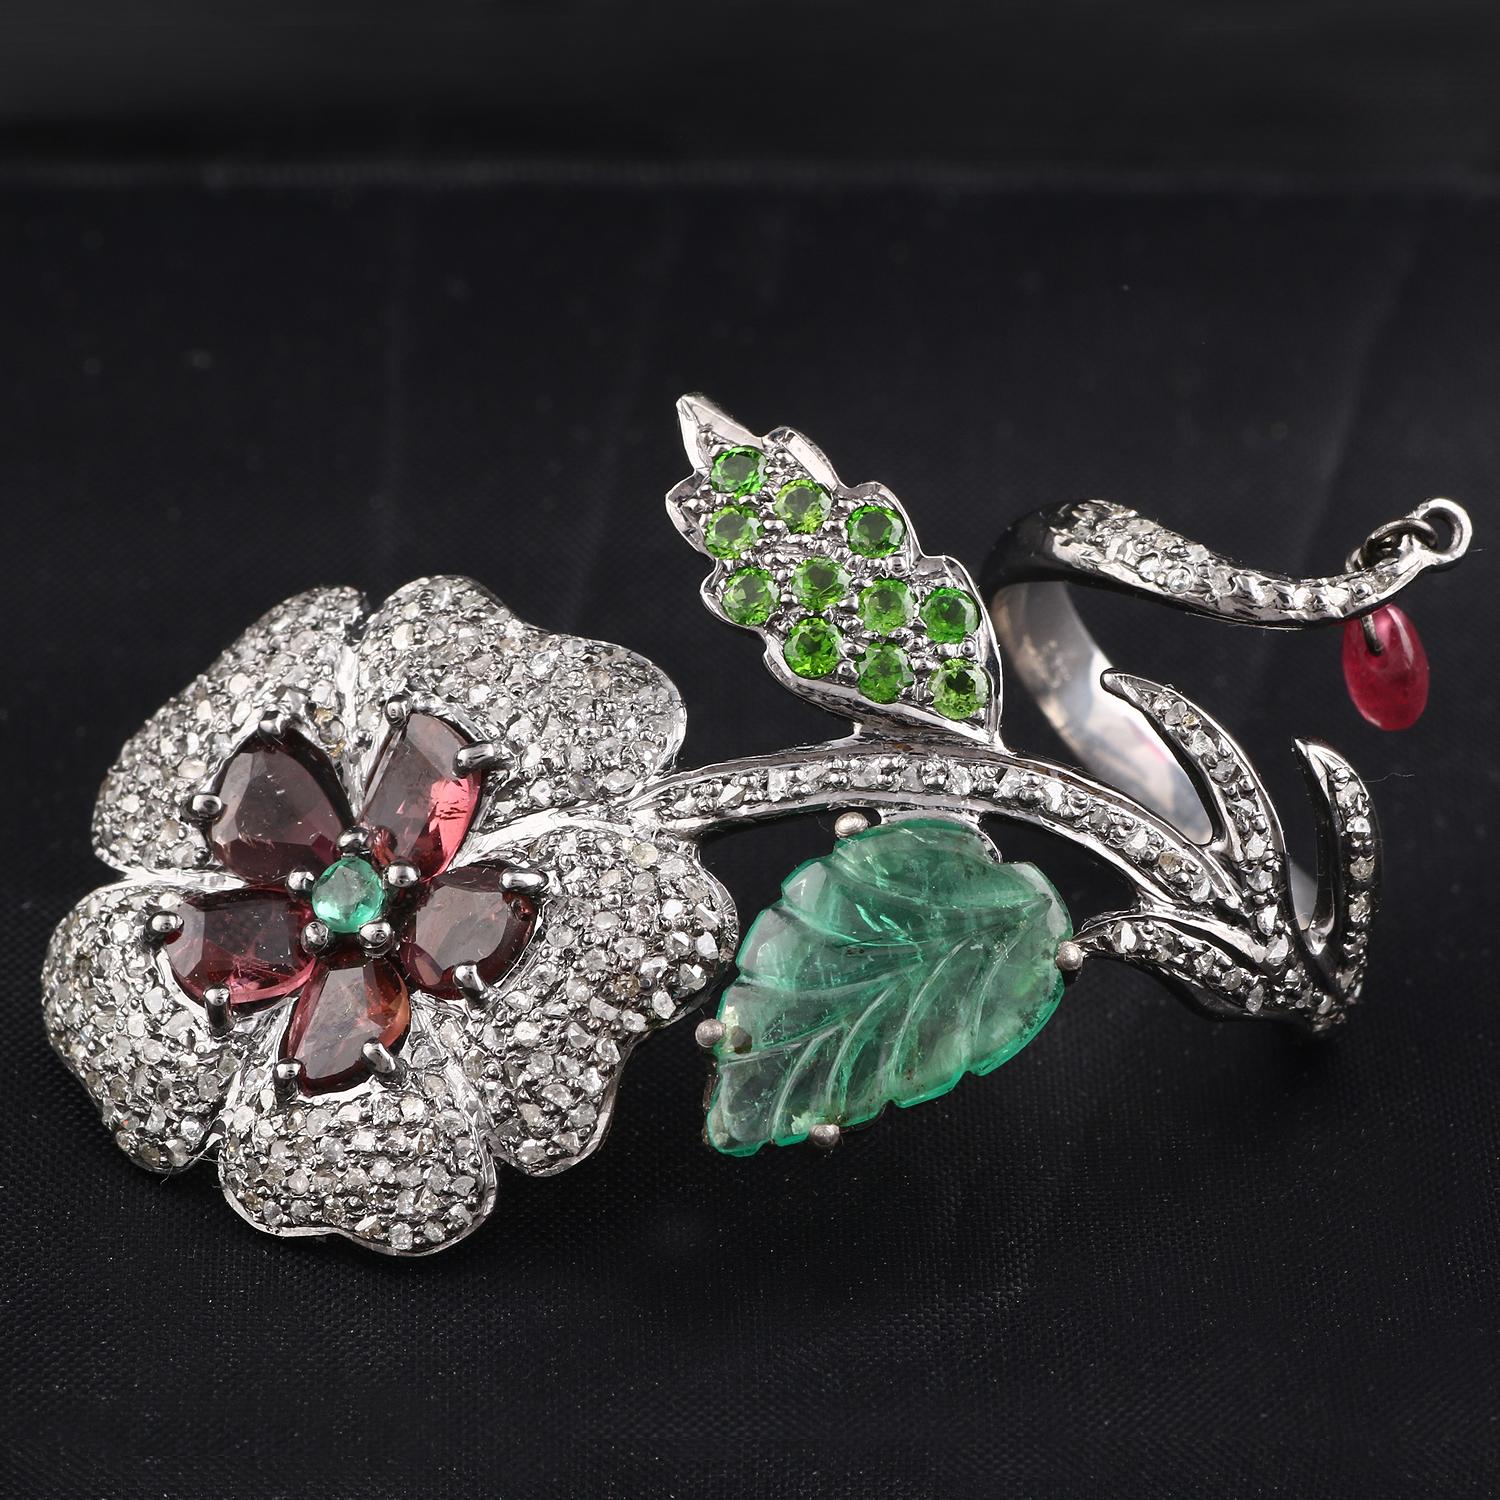 Item details:-

✦ SKU:- ESRG00127

✦ Material :- Silver
✦ Gemstone Specification:-
✧ Diamond
✧ Emerald, Tsavorite 

✦ Approx. Diamond Weight : 1.05
✦ Approx. Silver Weight : 8.31
✦ Approx. Gross Weight : 9.45

Ring Size (US): 7

You will Get the